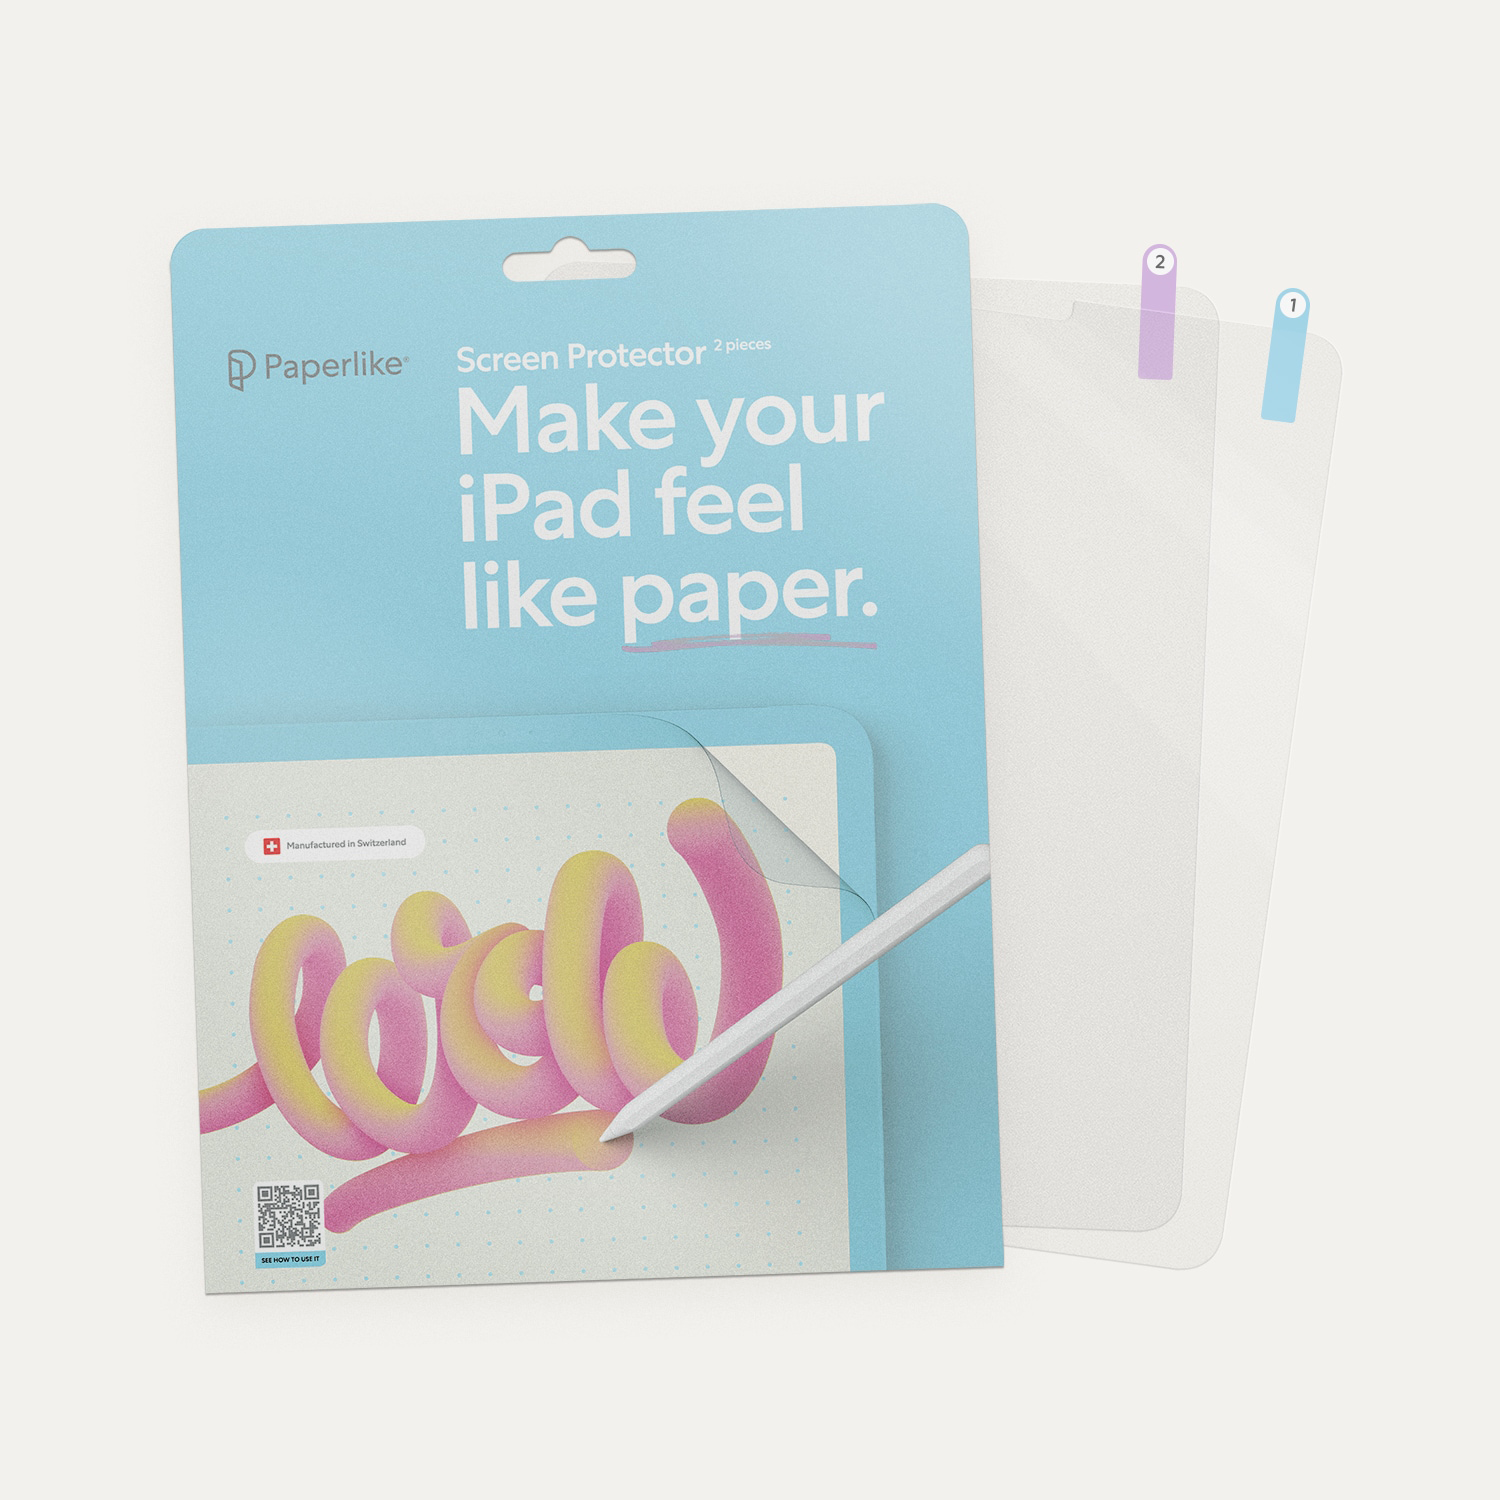 Paperlike's paper-feel screen protector engineered with Nanodots comes in a pack of 2